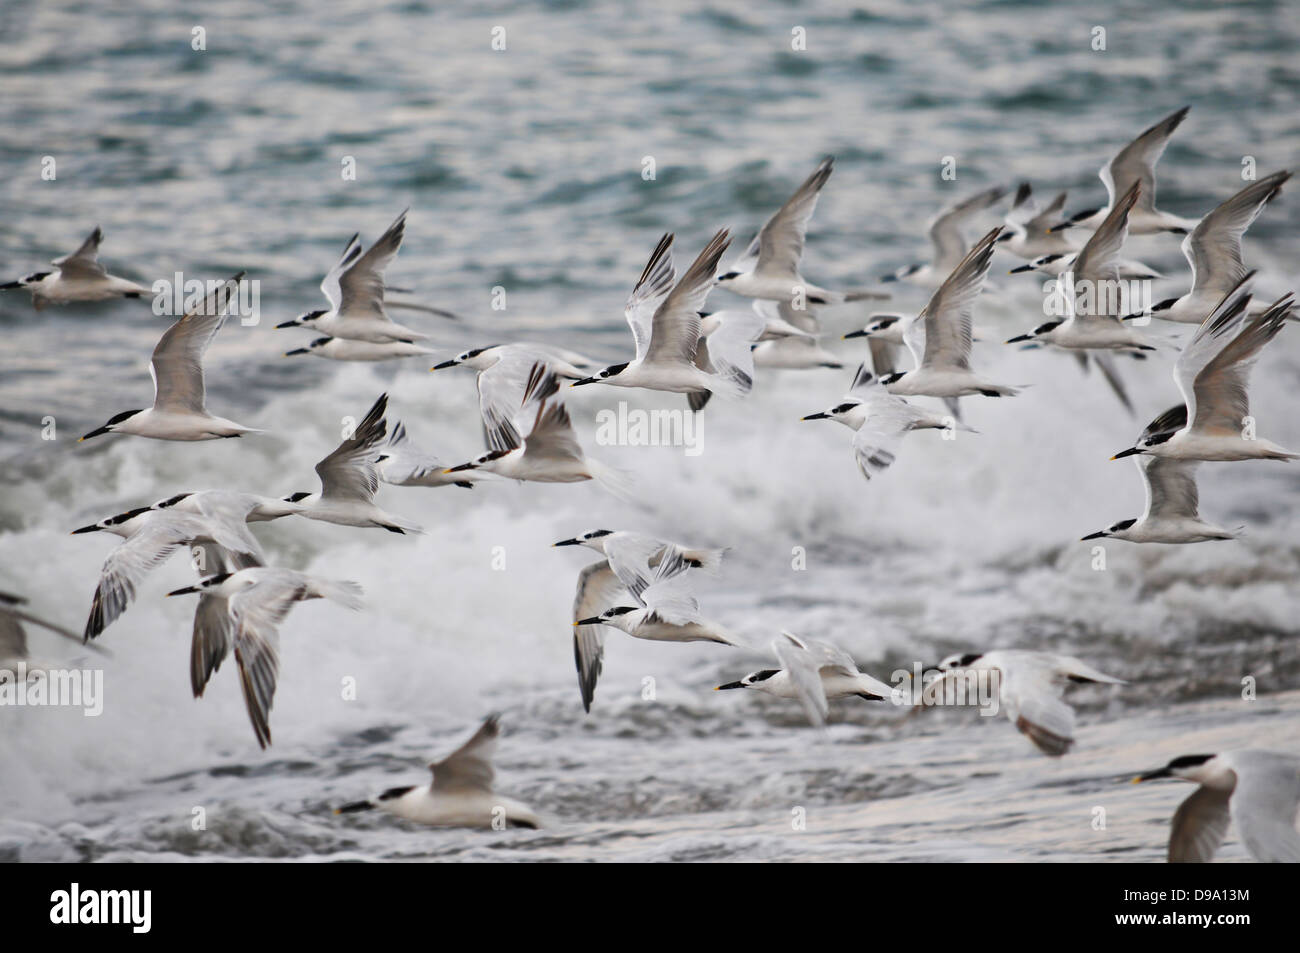 Large flock of sea birds flying acroos the waves at a bech in Panama Stock Photo